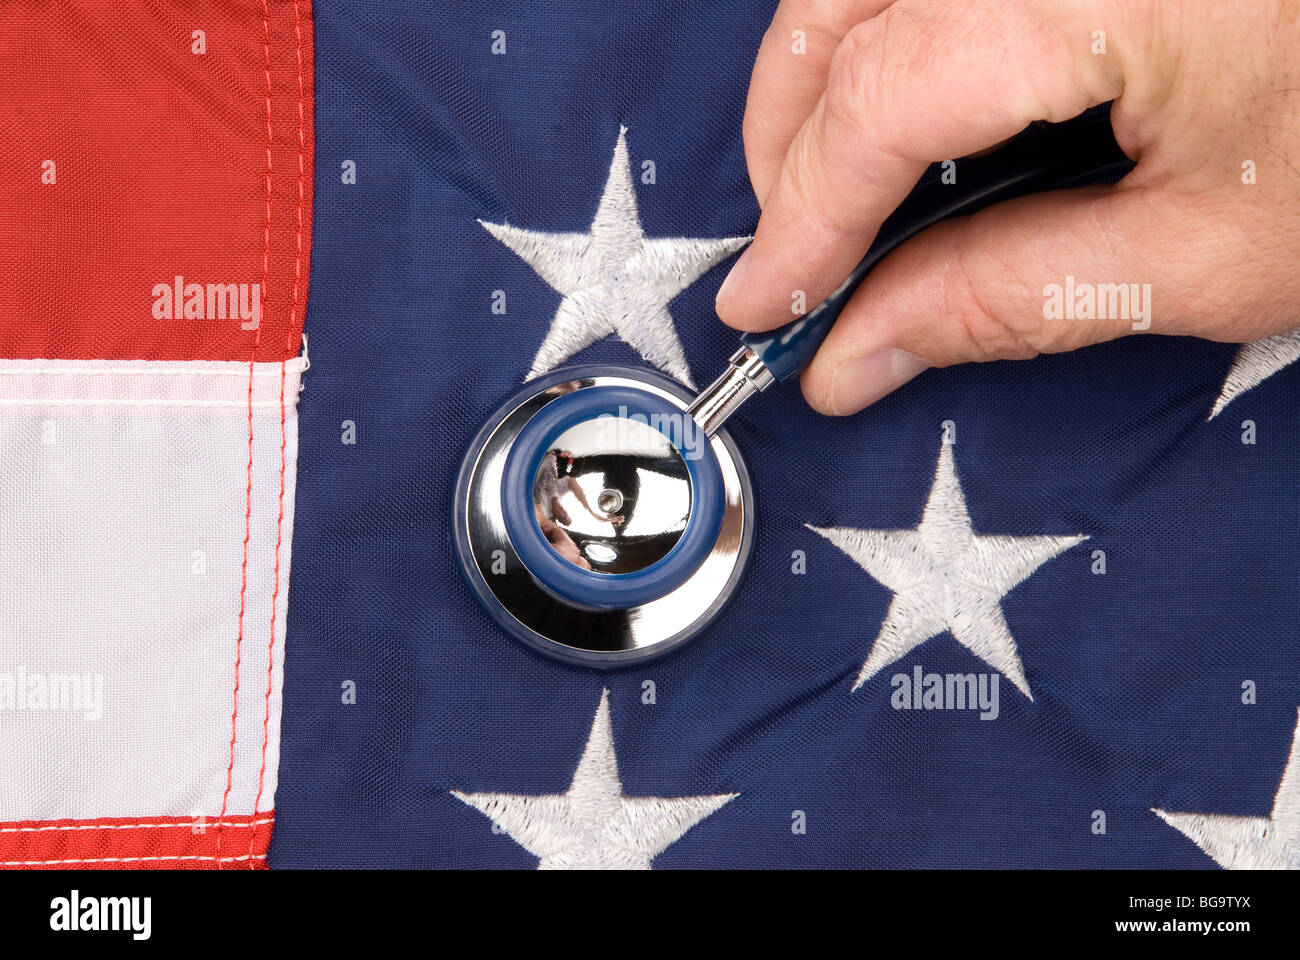 A doctor examines an American flag with a stethoscope. Image can be used for economic or medical inferences. Stock Photo